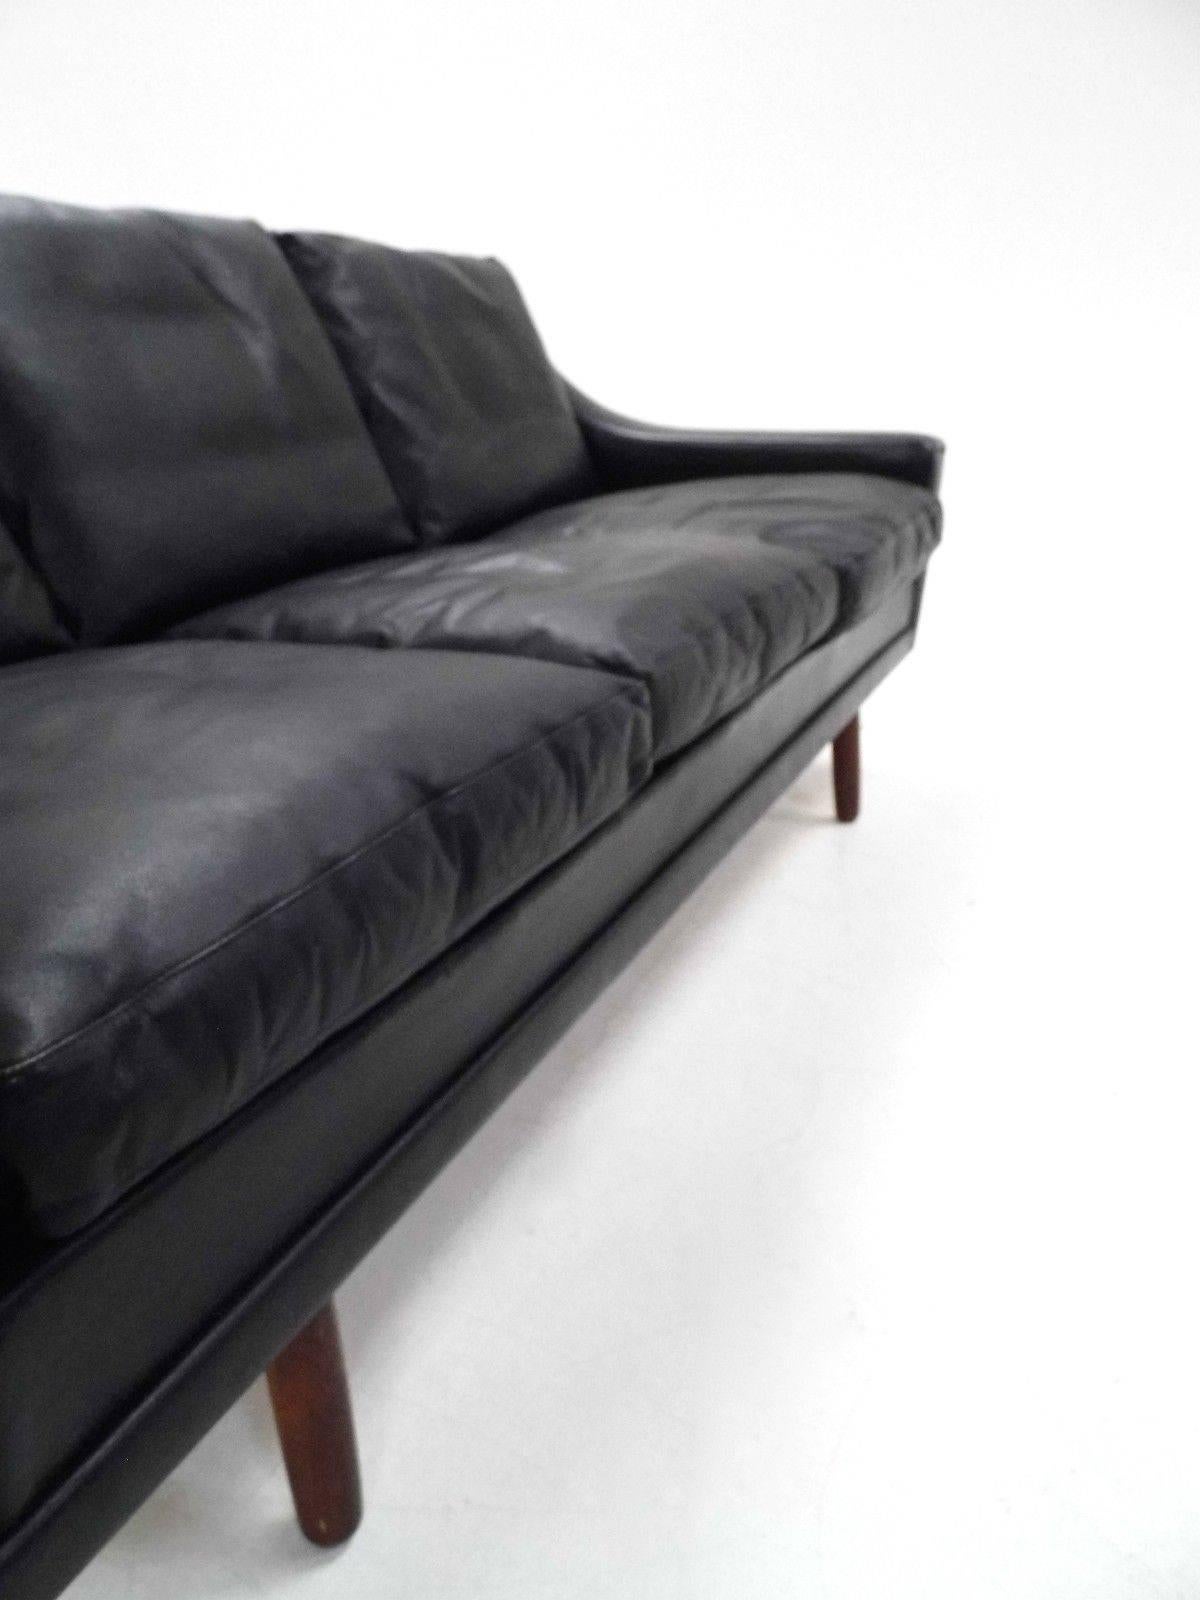 A beautiful Danish black leather and rosewood three-seat sofa, this would make a stylish addition to any living or work area. The sofa has wide cushions and sculptured padded armrests for enhanced comfort. A striking piece of classic Scandinavian